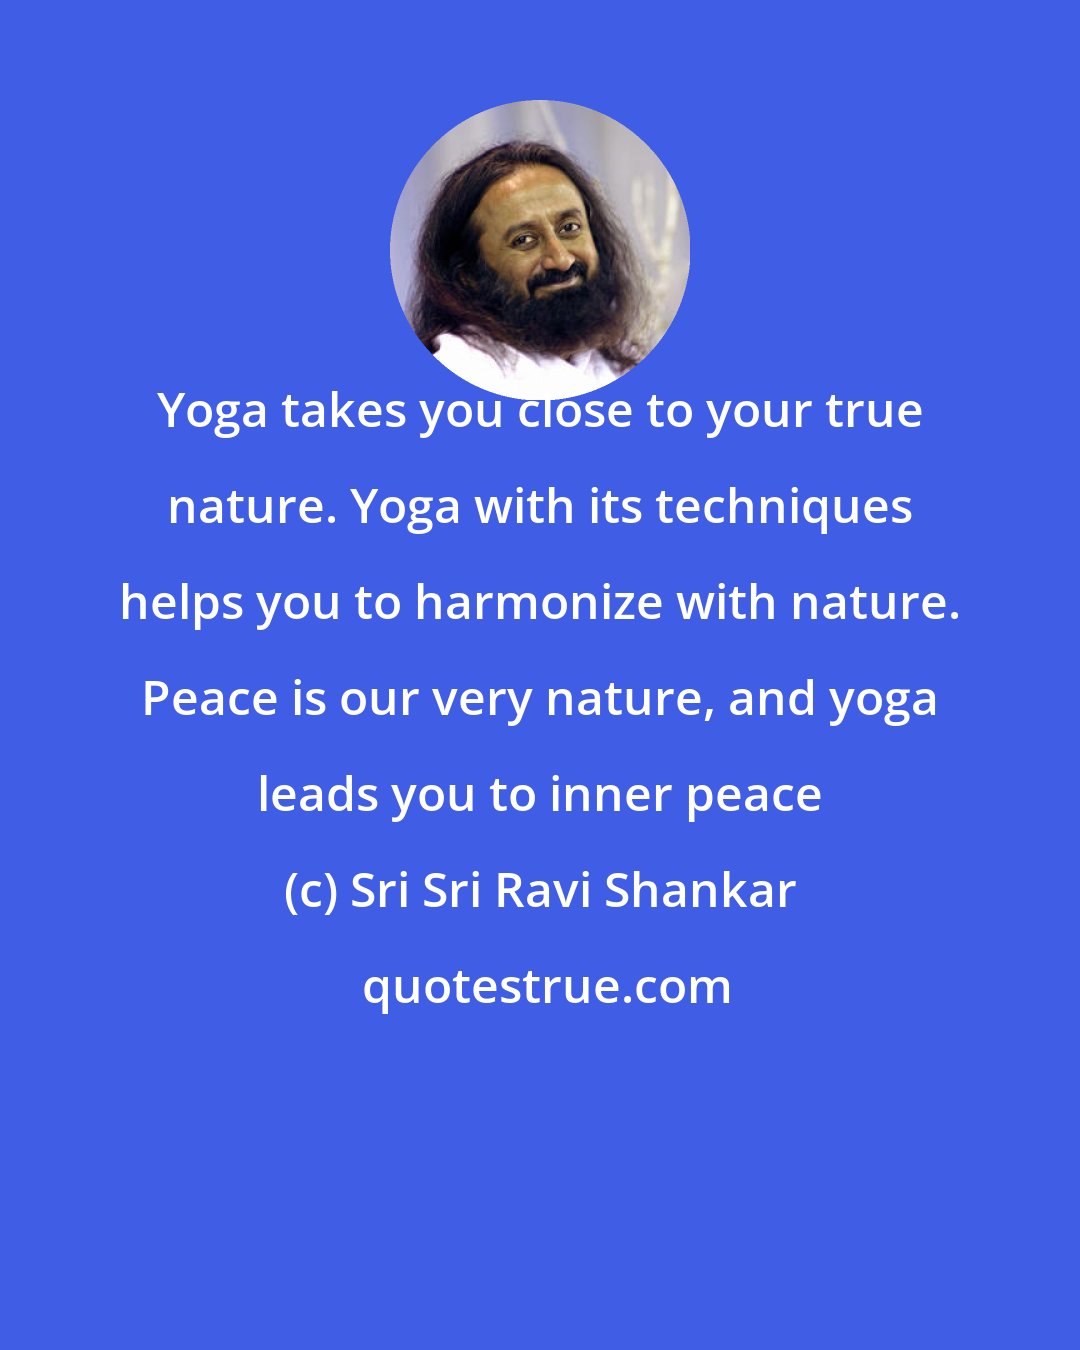 Sri Sri Ravi Shankar: Yoga takes you close to your true nature. Yoga with its techniques helps you to harmonize with nature. Peace is our very nature, and yoga leads you to inner peace